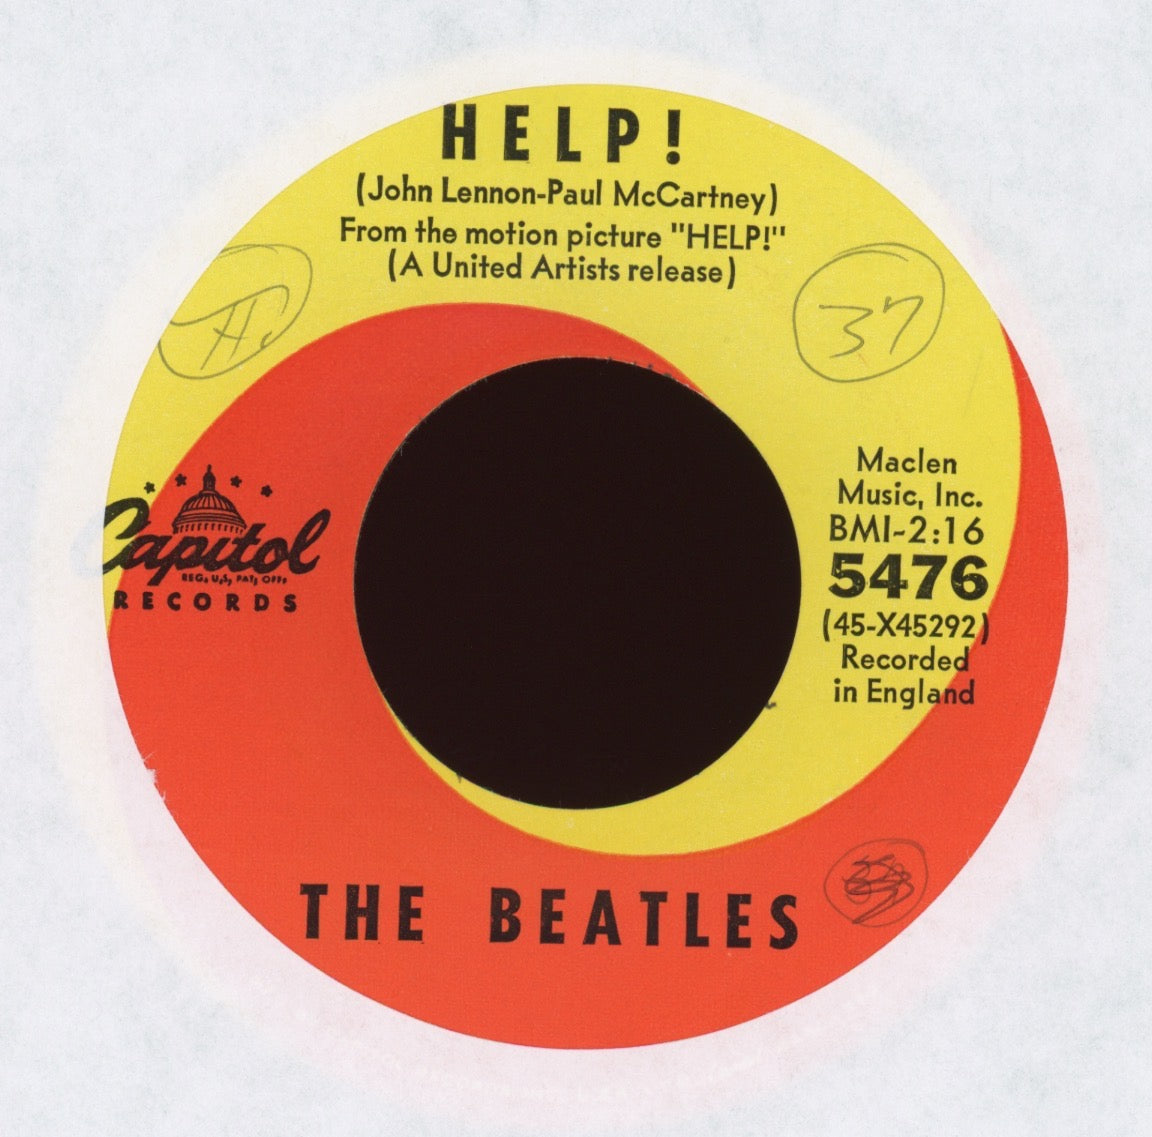 The Beatles - Help! / I’m Down on Capitol 45 With Picture Sleeve